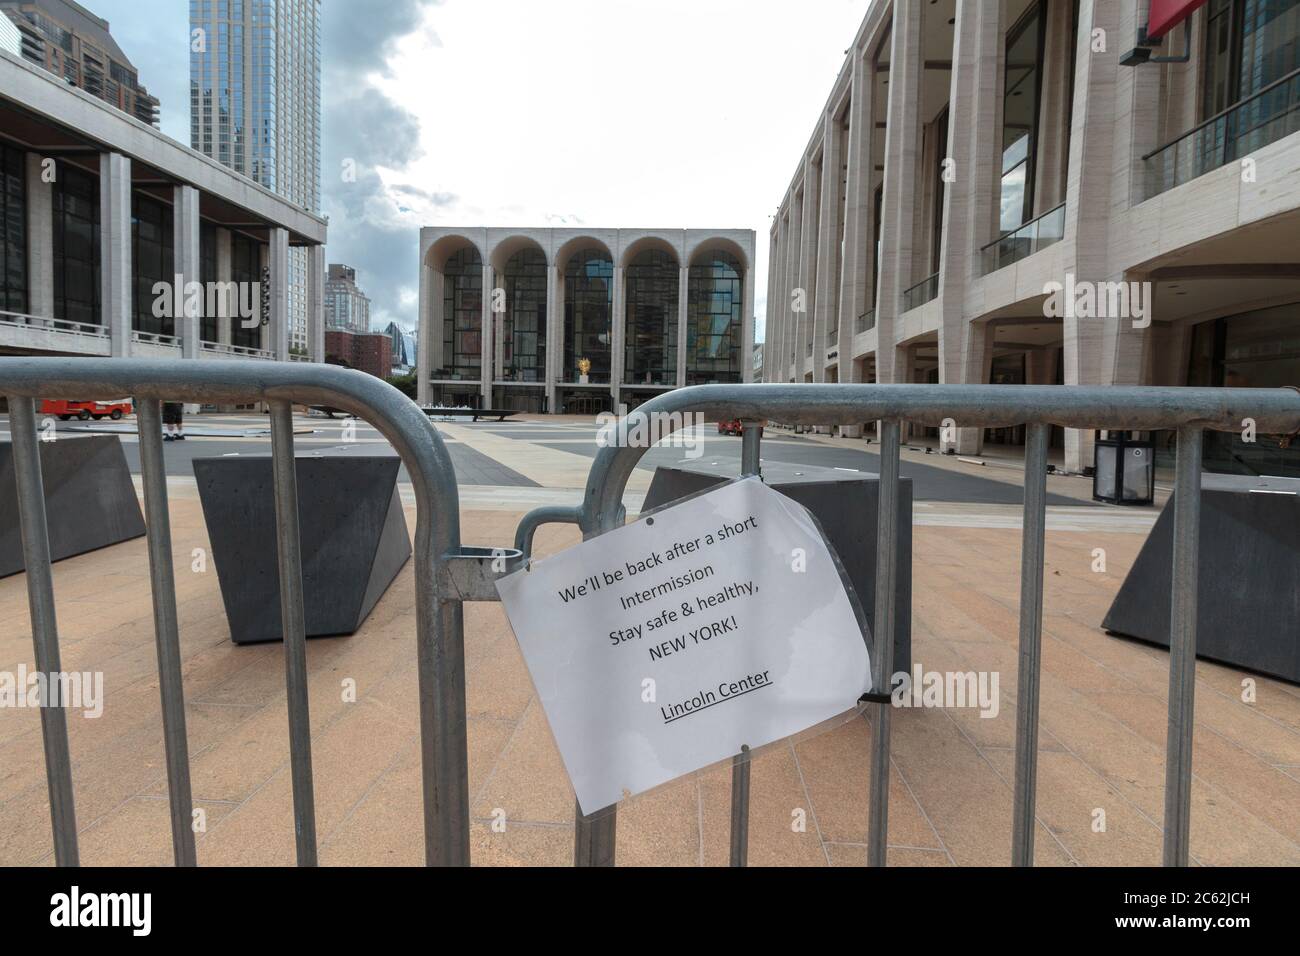 sarcastic sign on a barrier in front of the metropolitan opera house, closed due to the coronavirus or covid-19 pandemic, saying it is in intermission Stock Photo